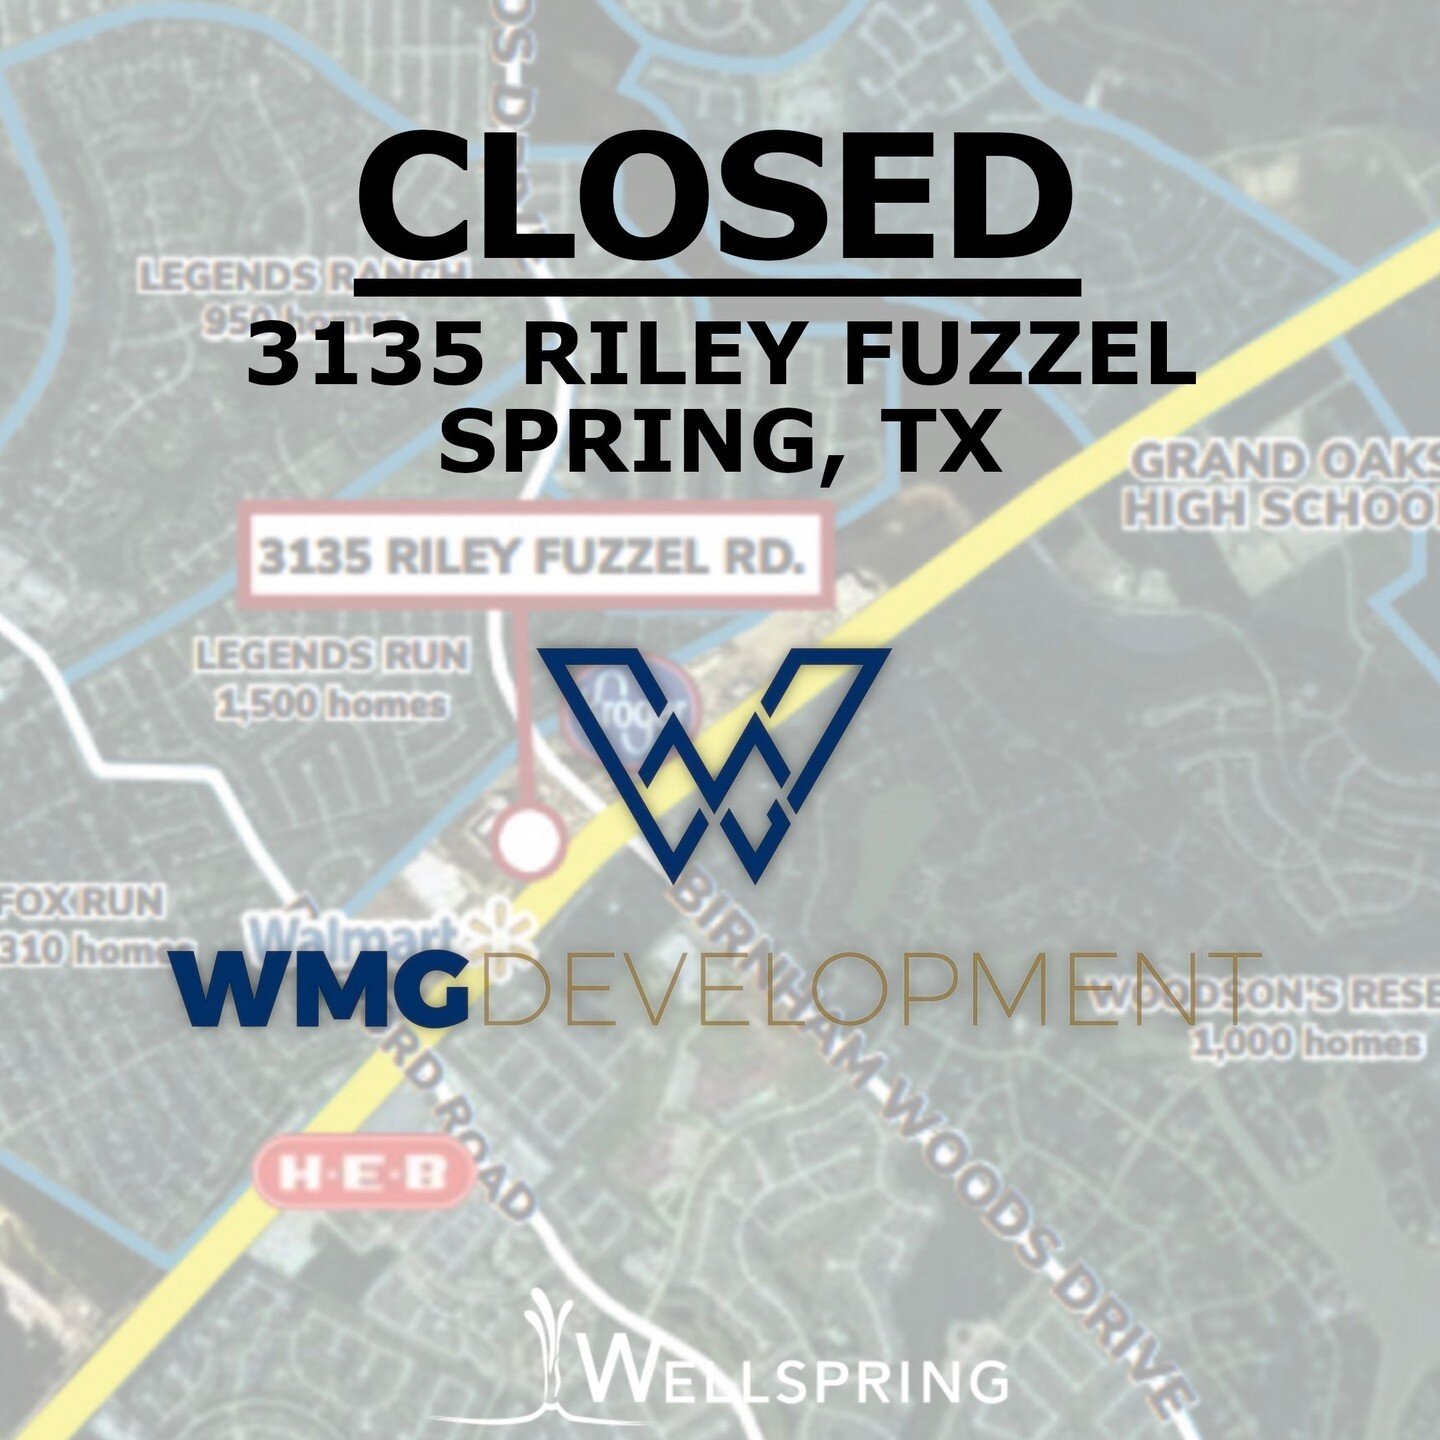 Redevelopment is still alive! Wellspring is pleased to announce WMG Development&rsquo;s acquisition of a freestanding building with prime Grand Parkway visibility in Spring, TX. The building will be redeveloped into retail/service use, and is set to 